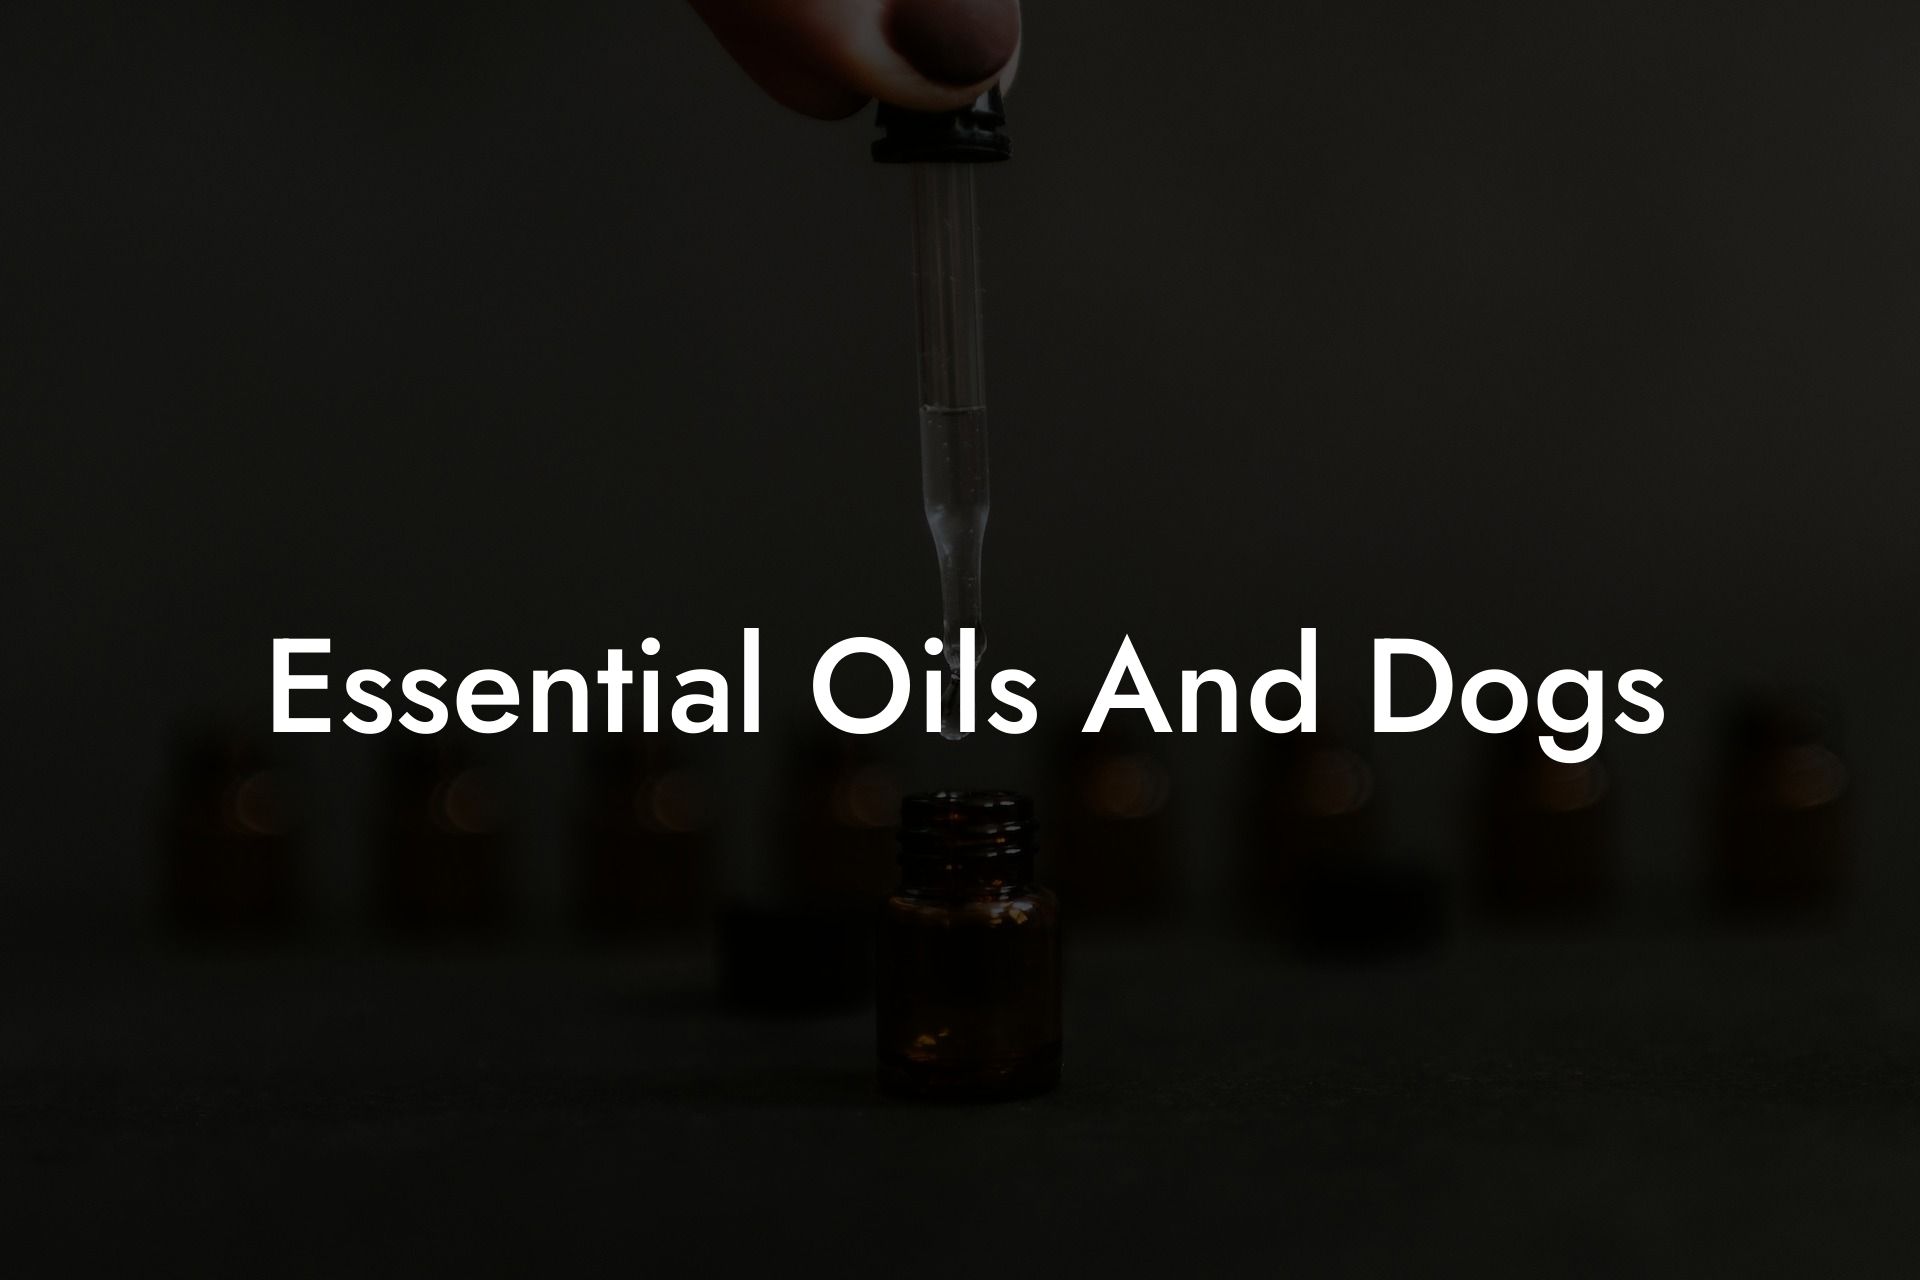 Essential Oils And Dogs